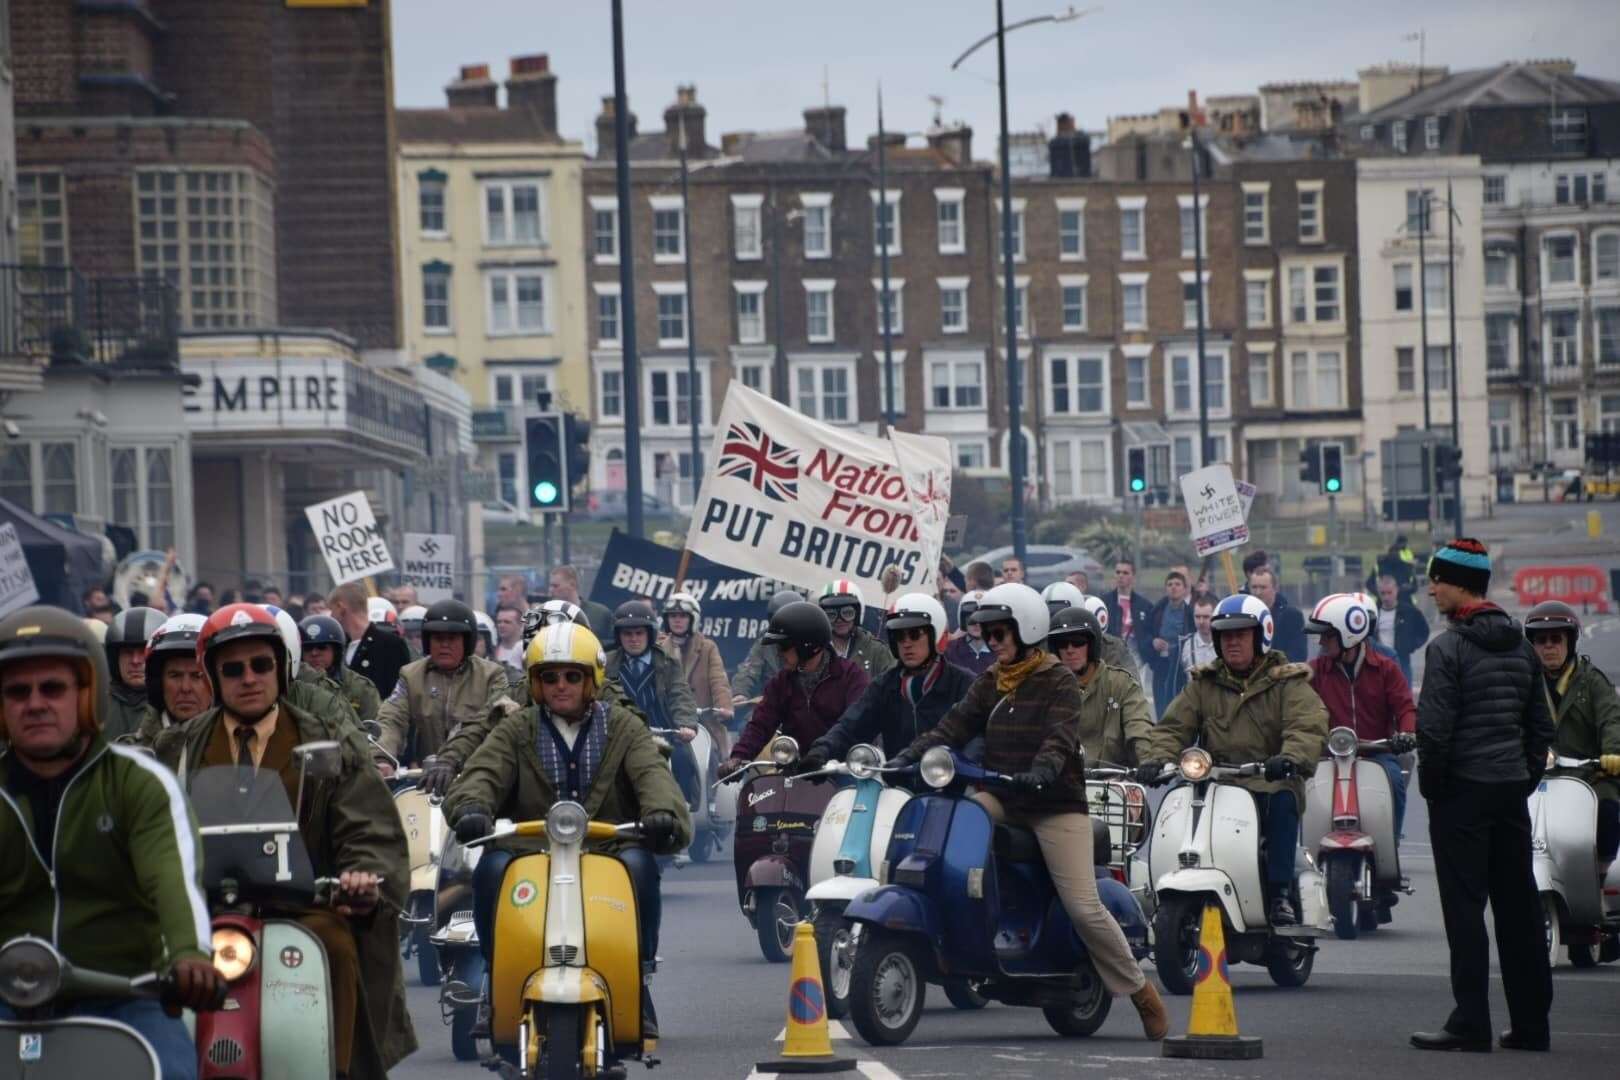 A procession of scooter-riding mods were seen riding along Margate seafront during filming of Empire of Light. Picture: Roberto Fabiani